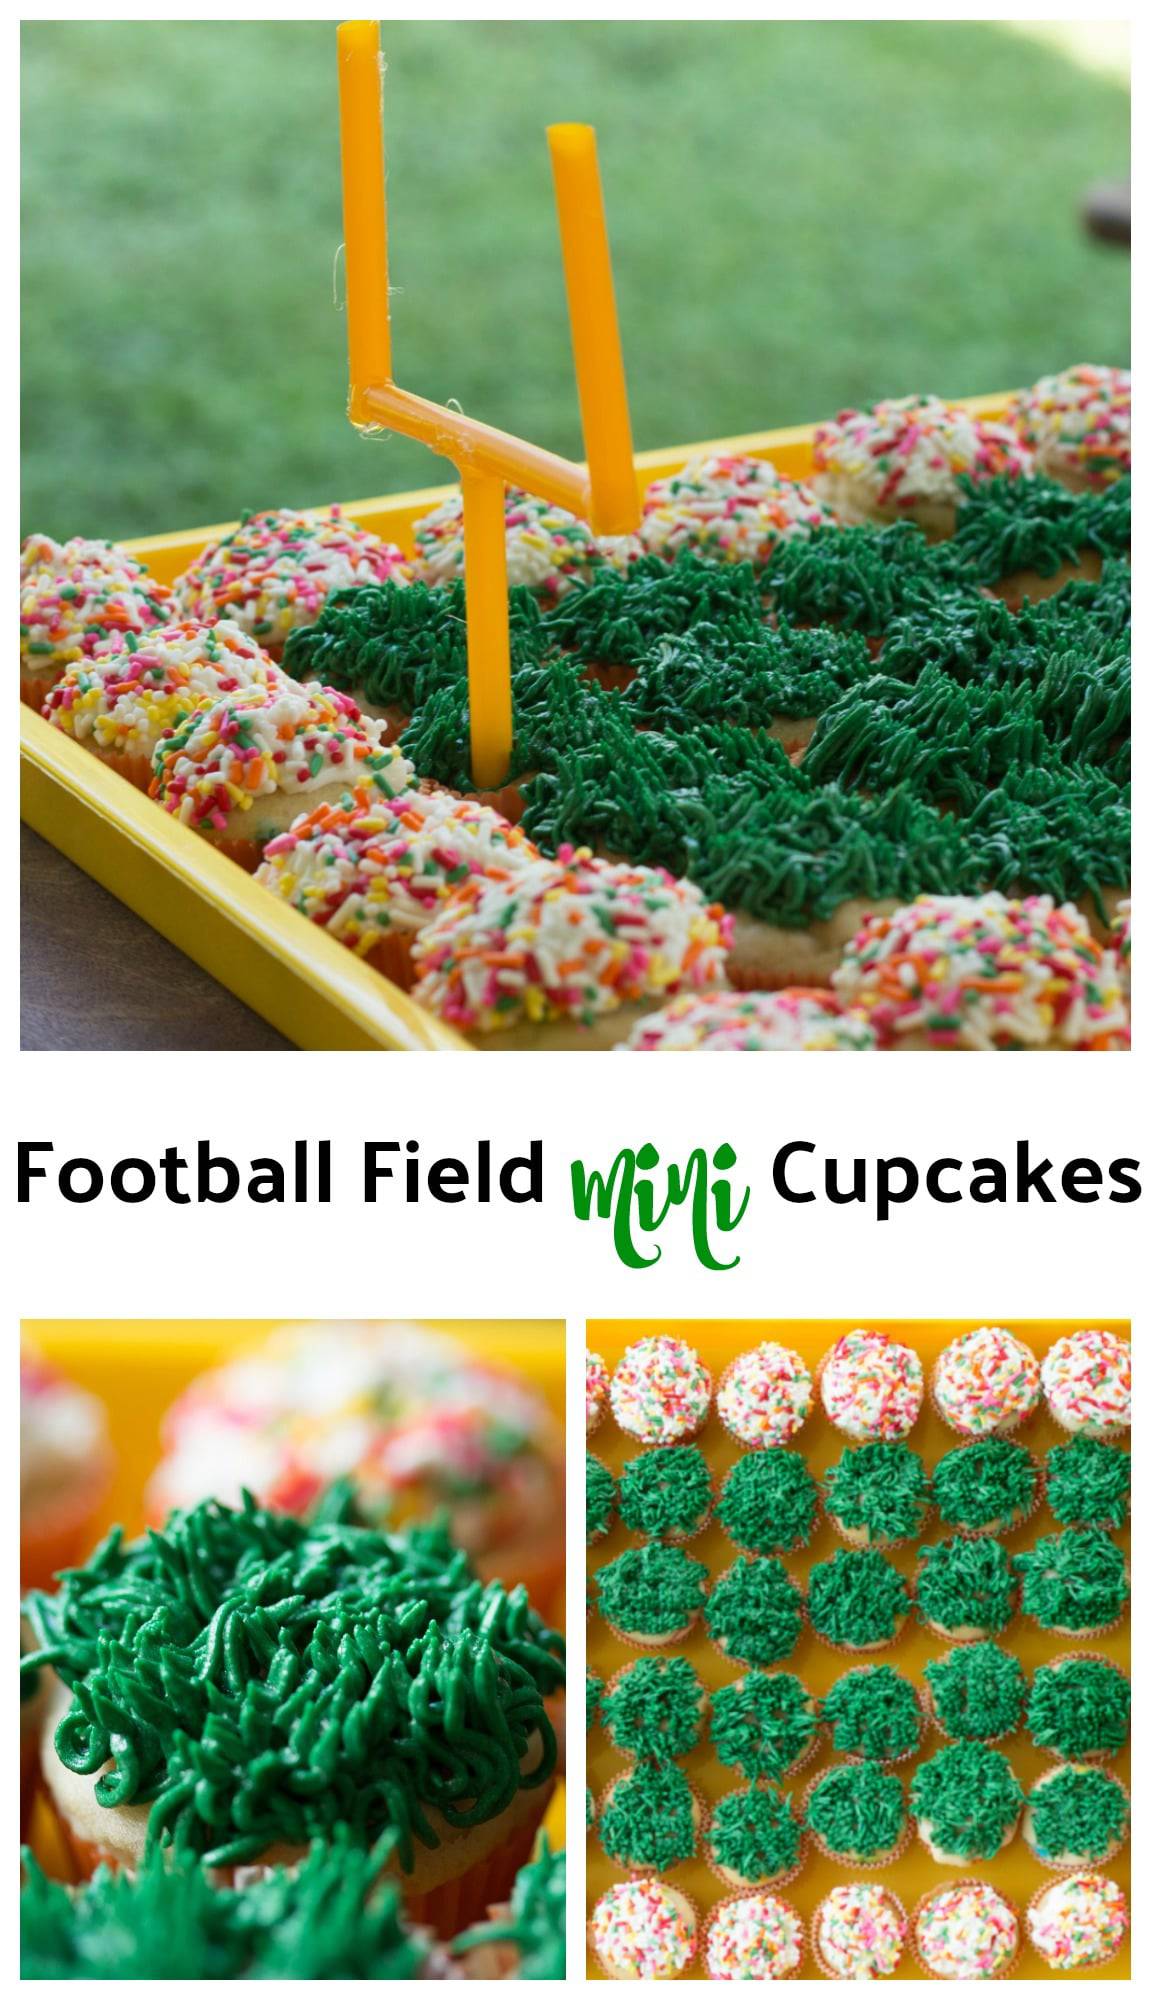 Football Field Mini Cupcakes || Erin Brighton | Super Bowl | Football Party | tailgating | cake decorating | gluten free | party food